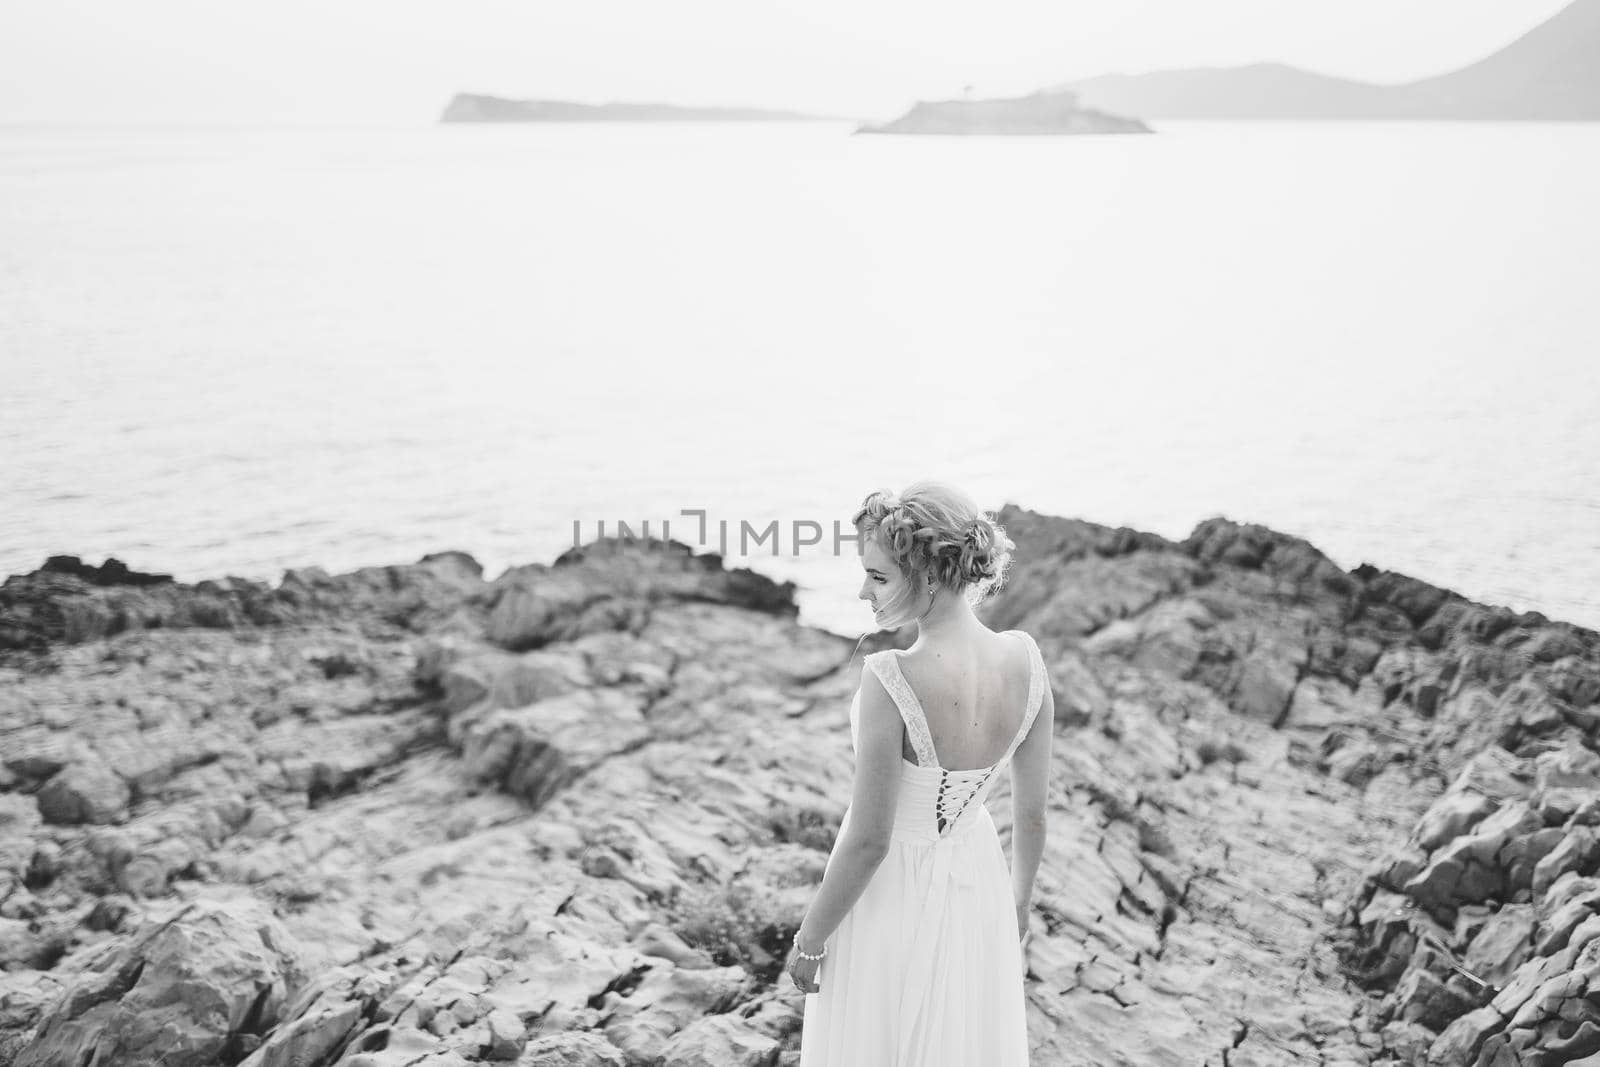 A tender bride stands on a rock by the sea, in front of her is an island, back view, black and white photo by Nadtochiy